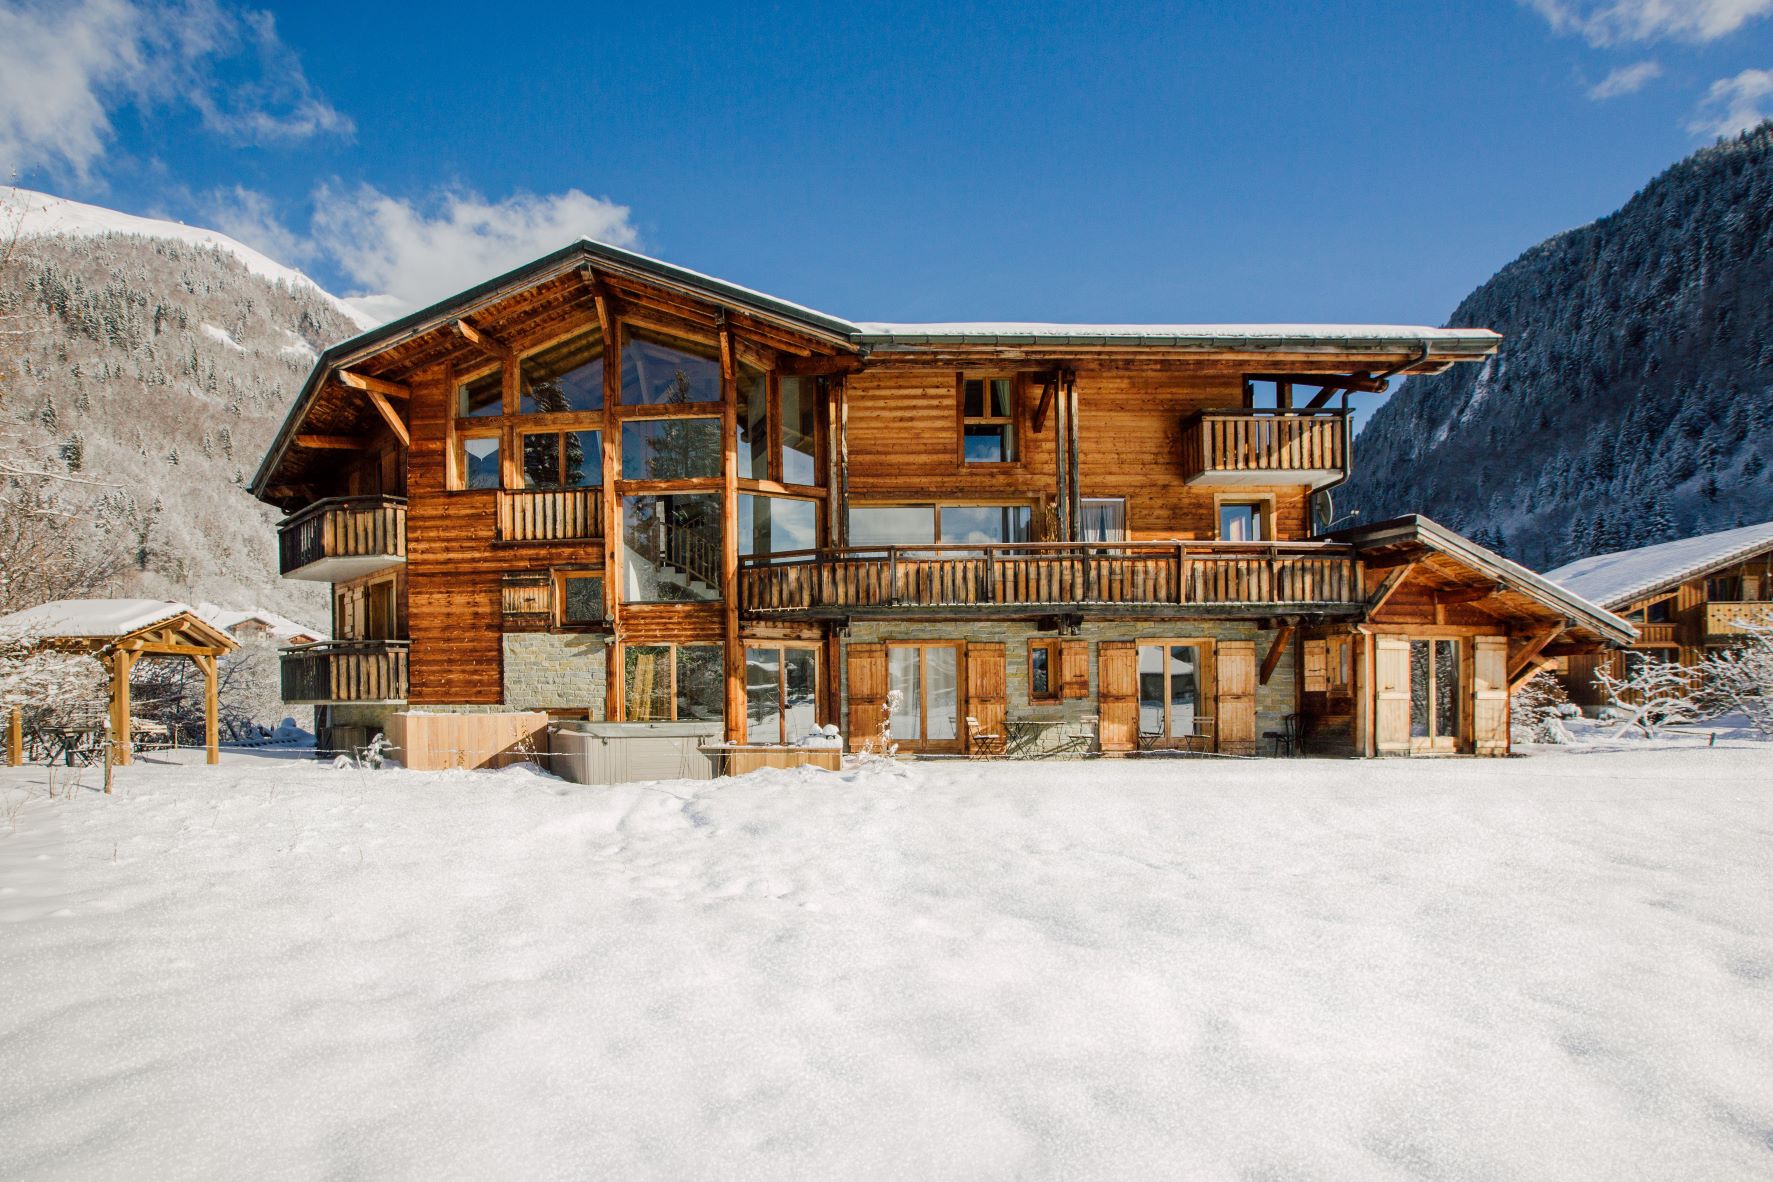 AliKats — a chalet company with sustainability at its core